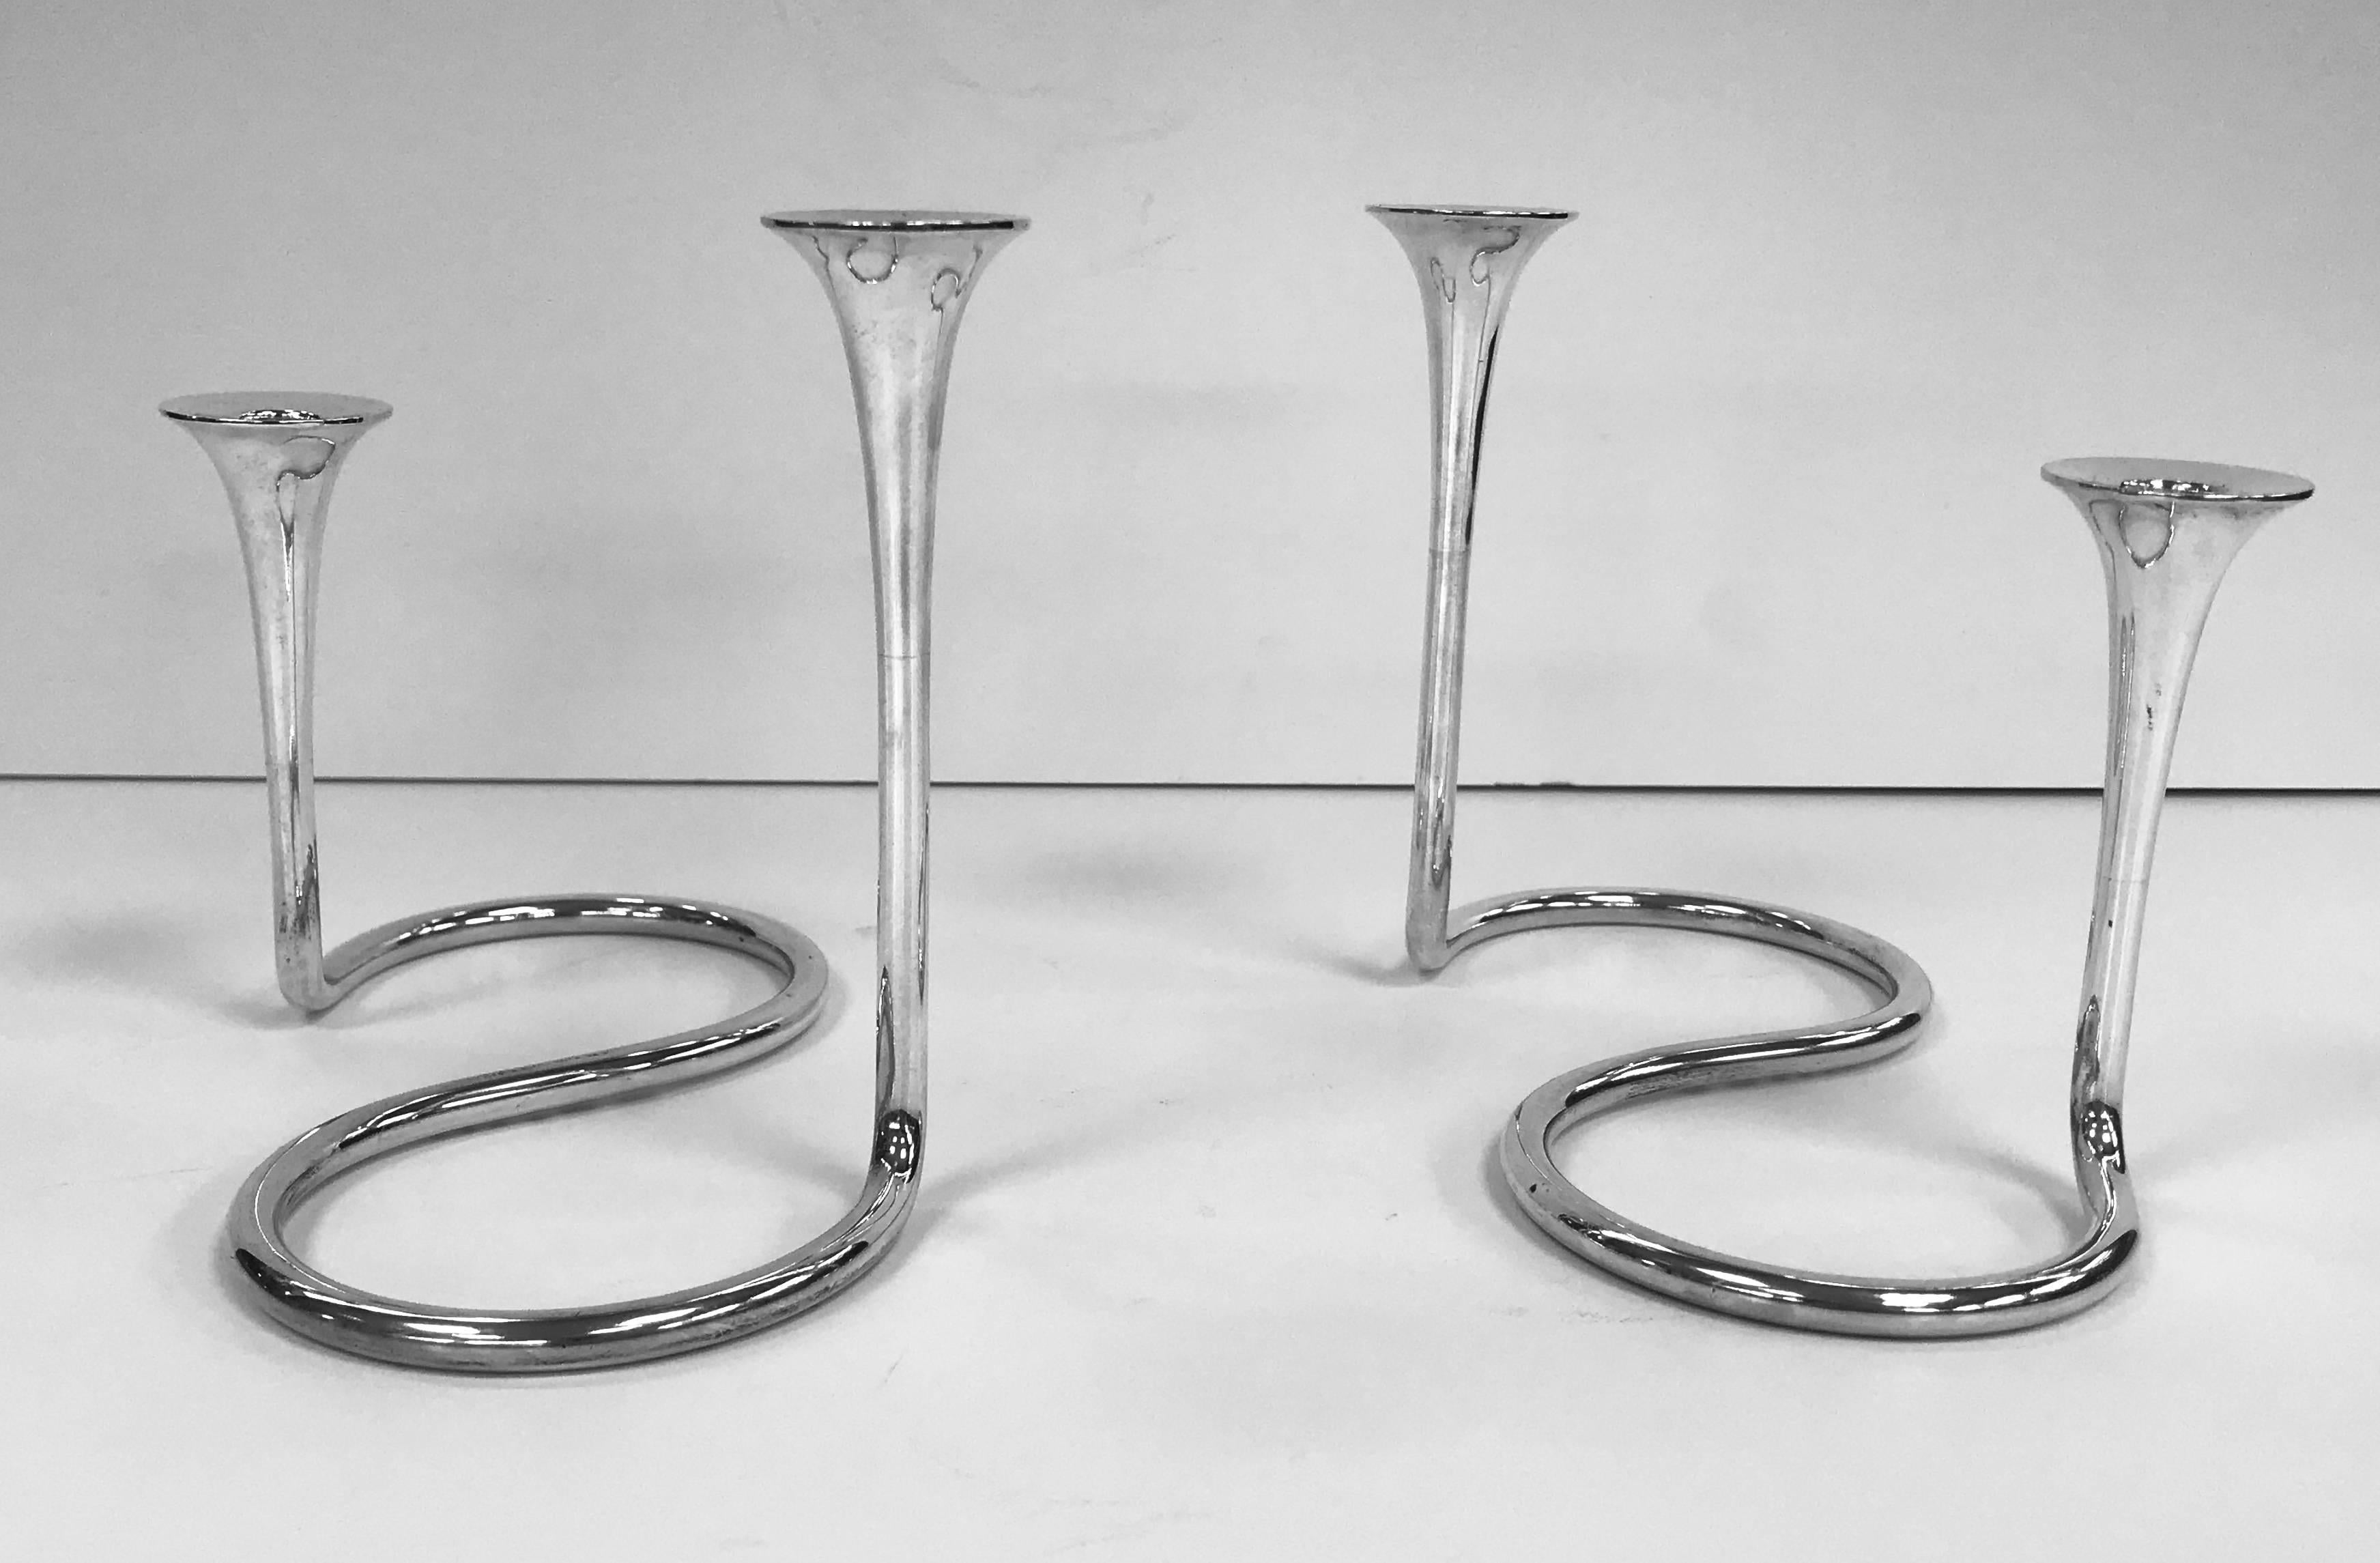 A pair of unusual silver candelabra made in Denmark, by Michelsen, circa 1960.